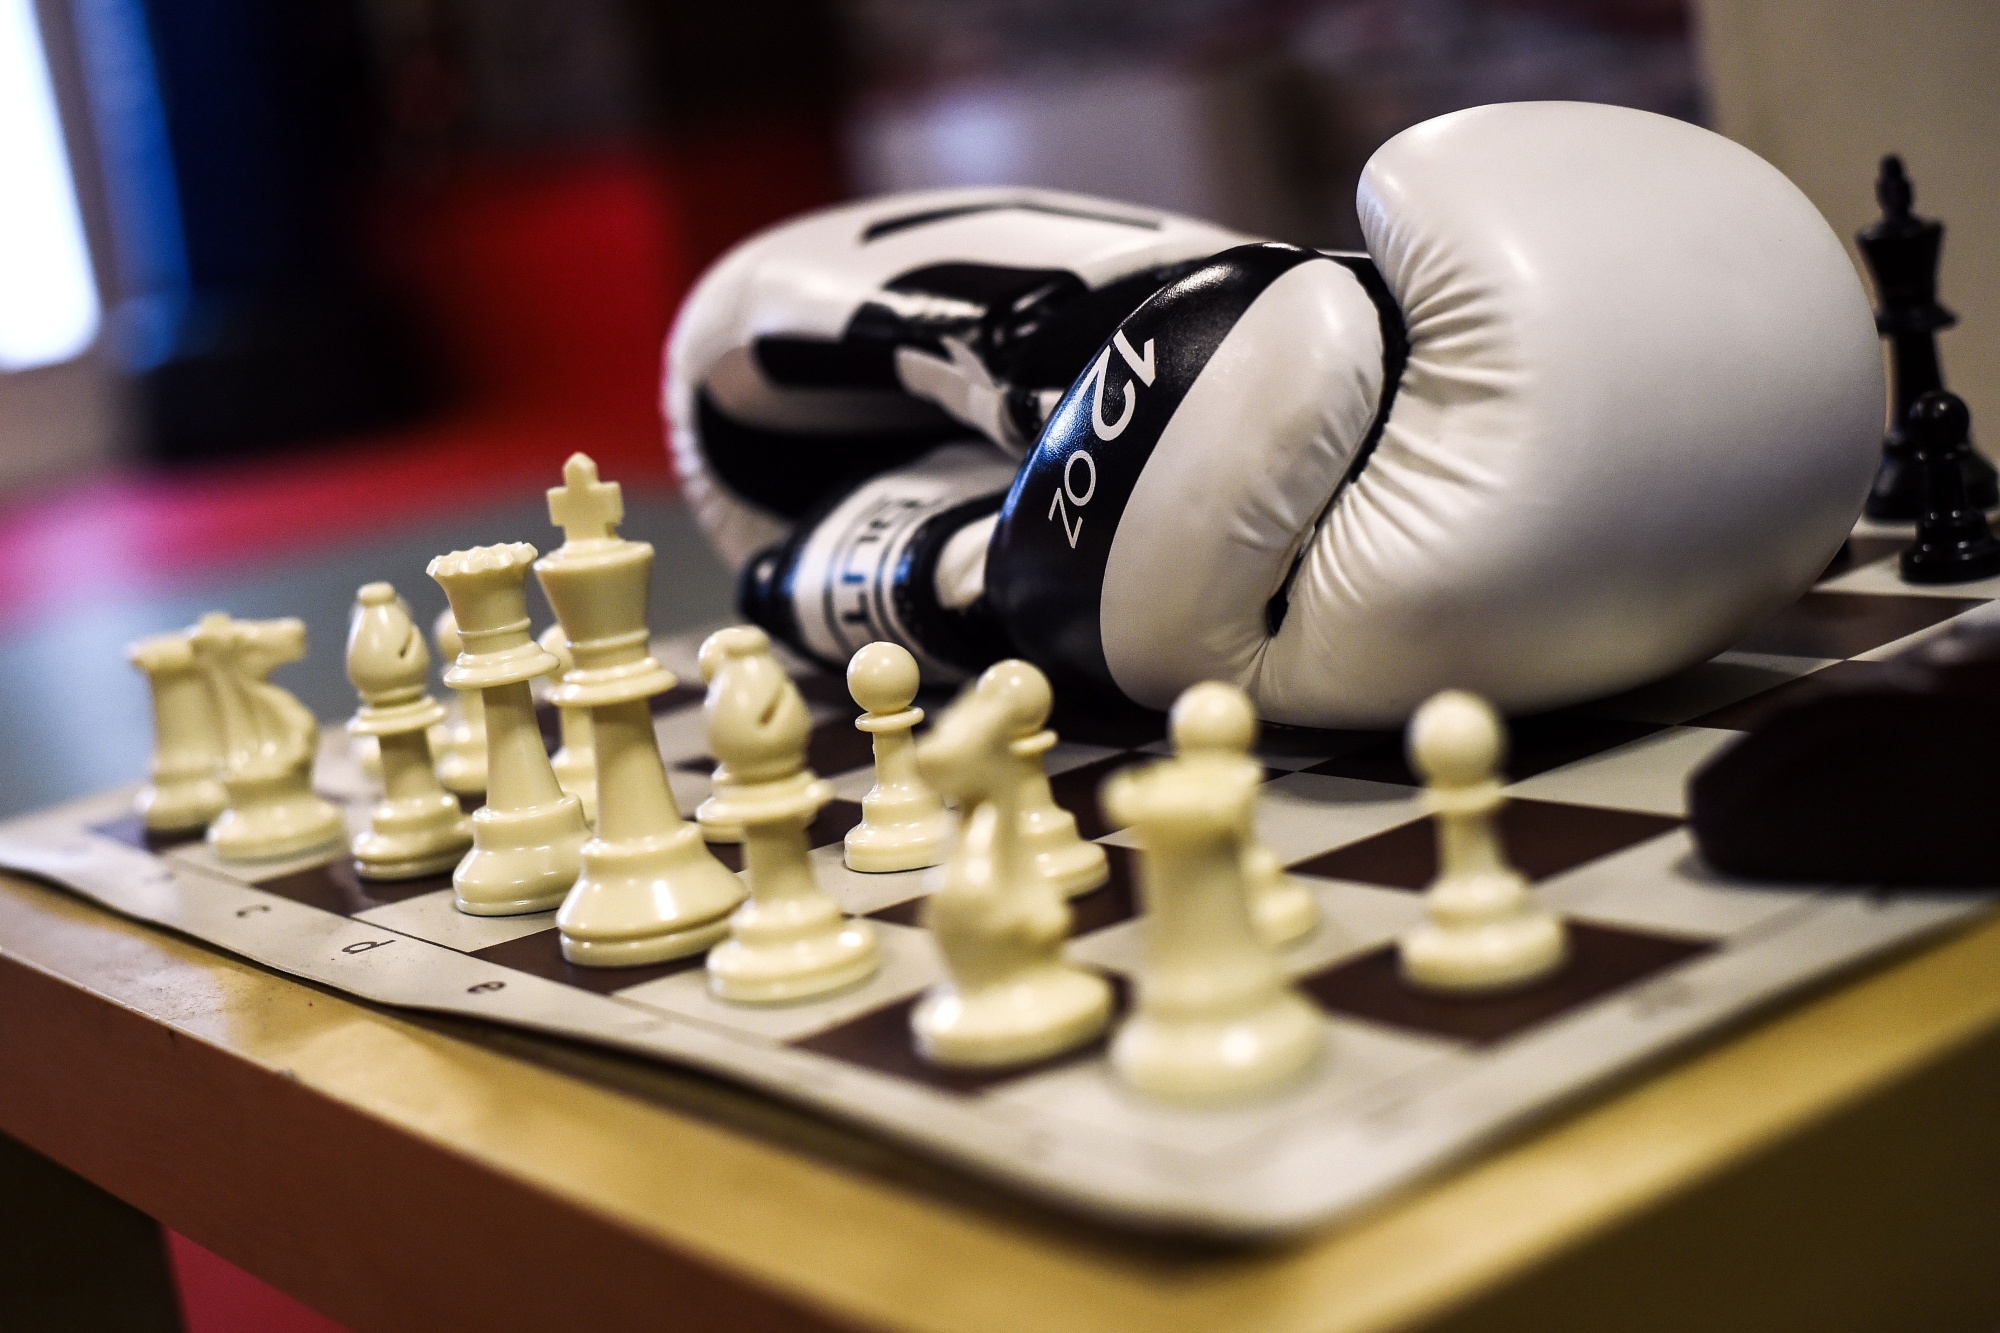 Boxer stuggling with chess game, Stock image